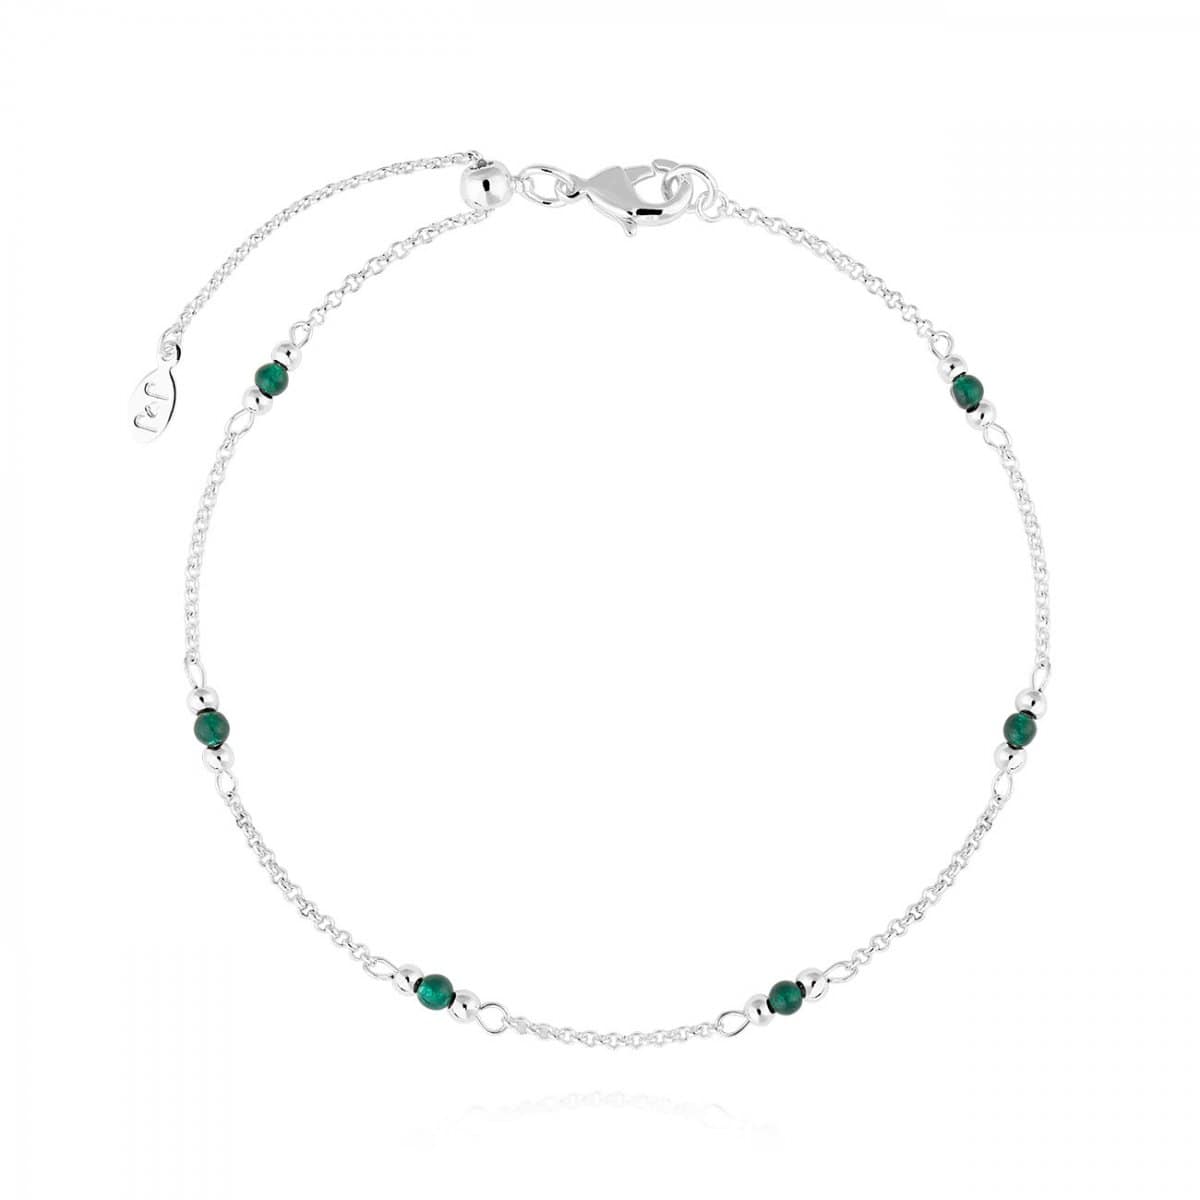 Joma Jewellery Anklet Joma Jewellery Anklet - Birthstone - May - Green Agate